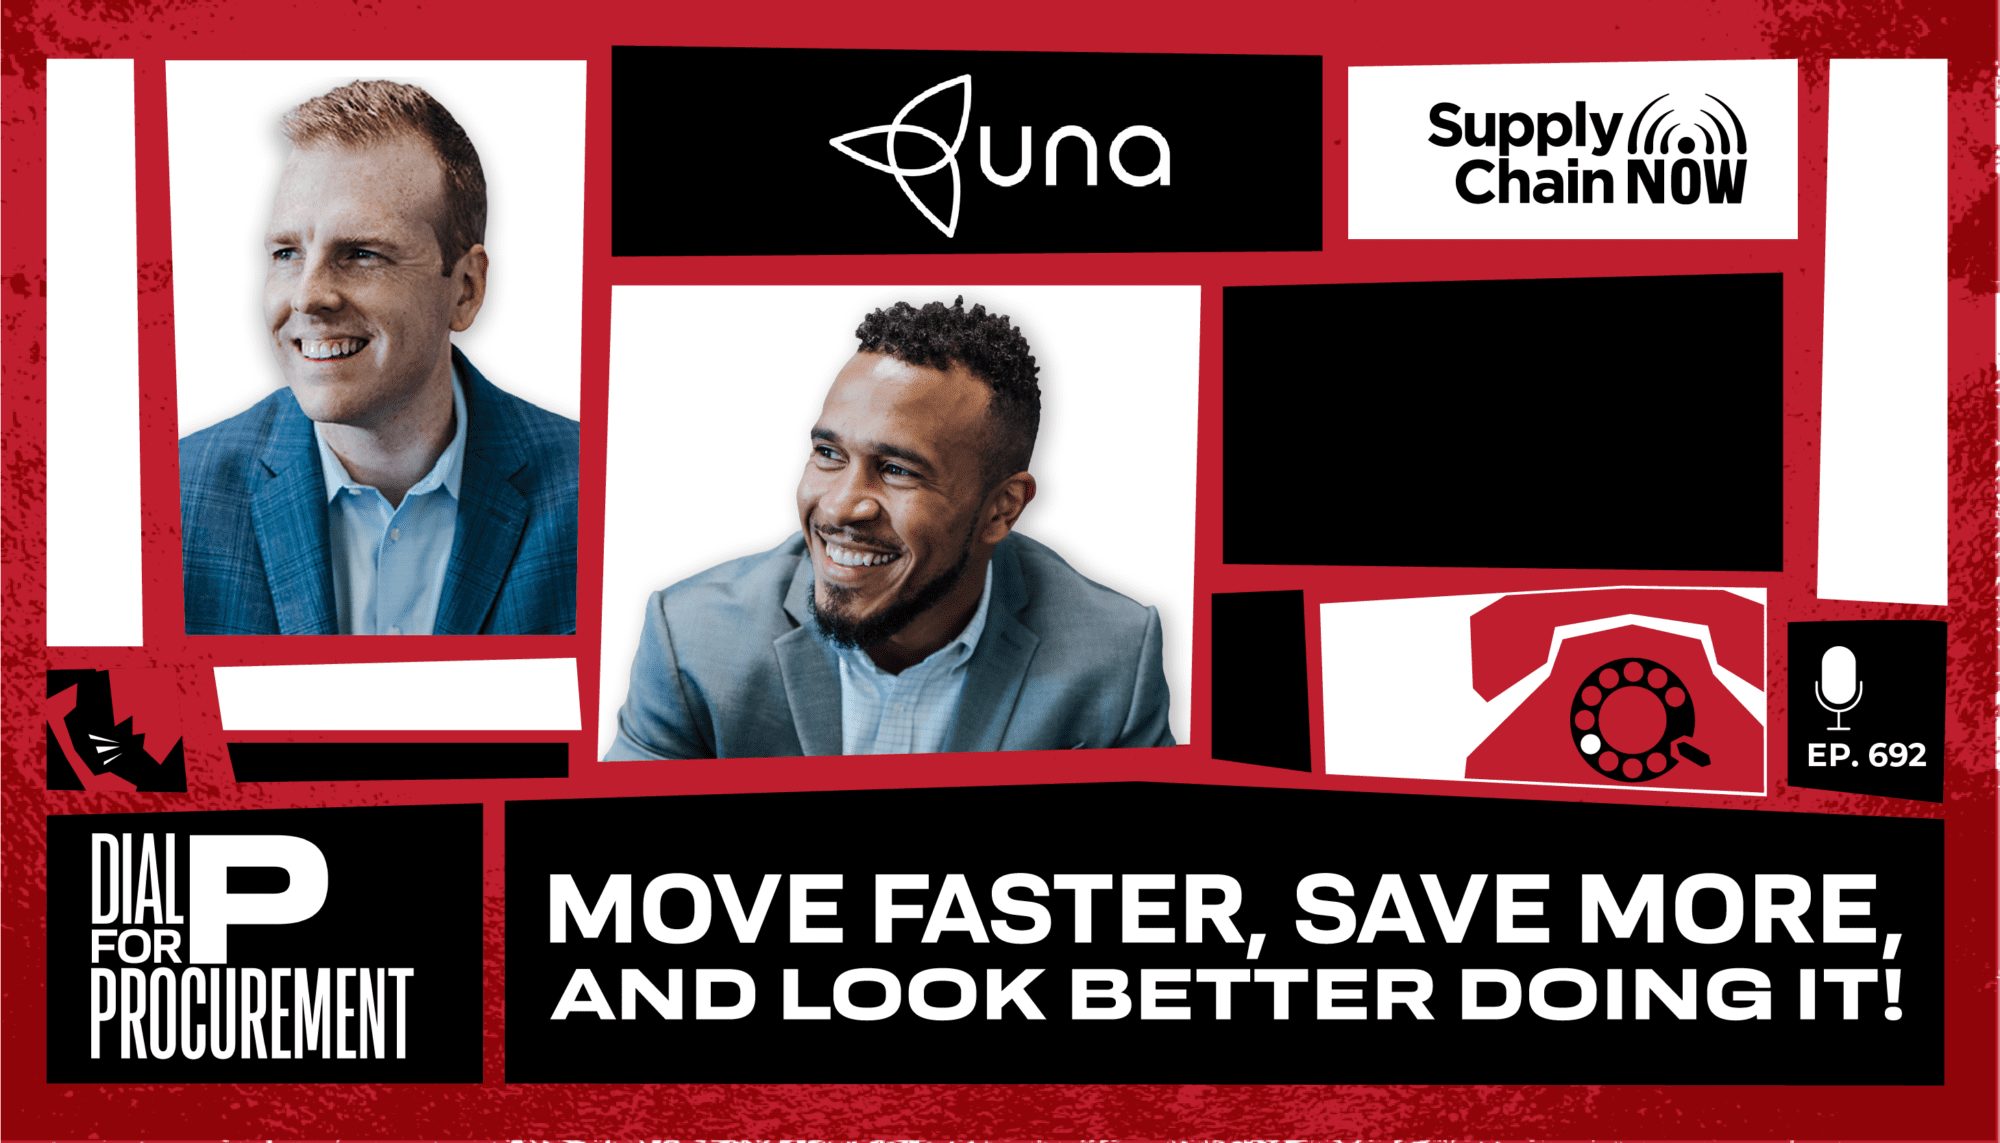 Una: Move Faster, Save More, and Look Better Doing It!